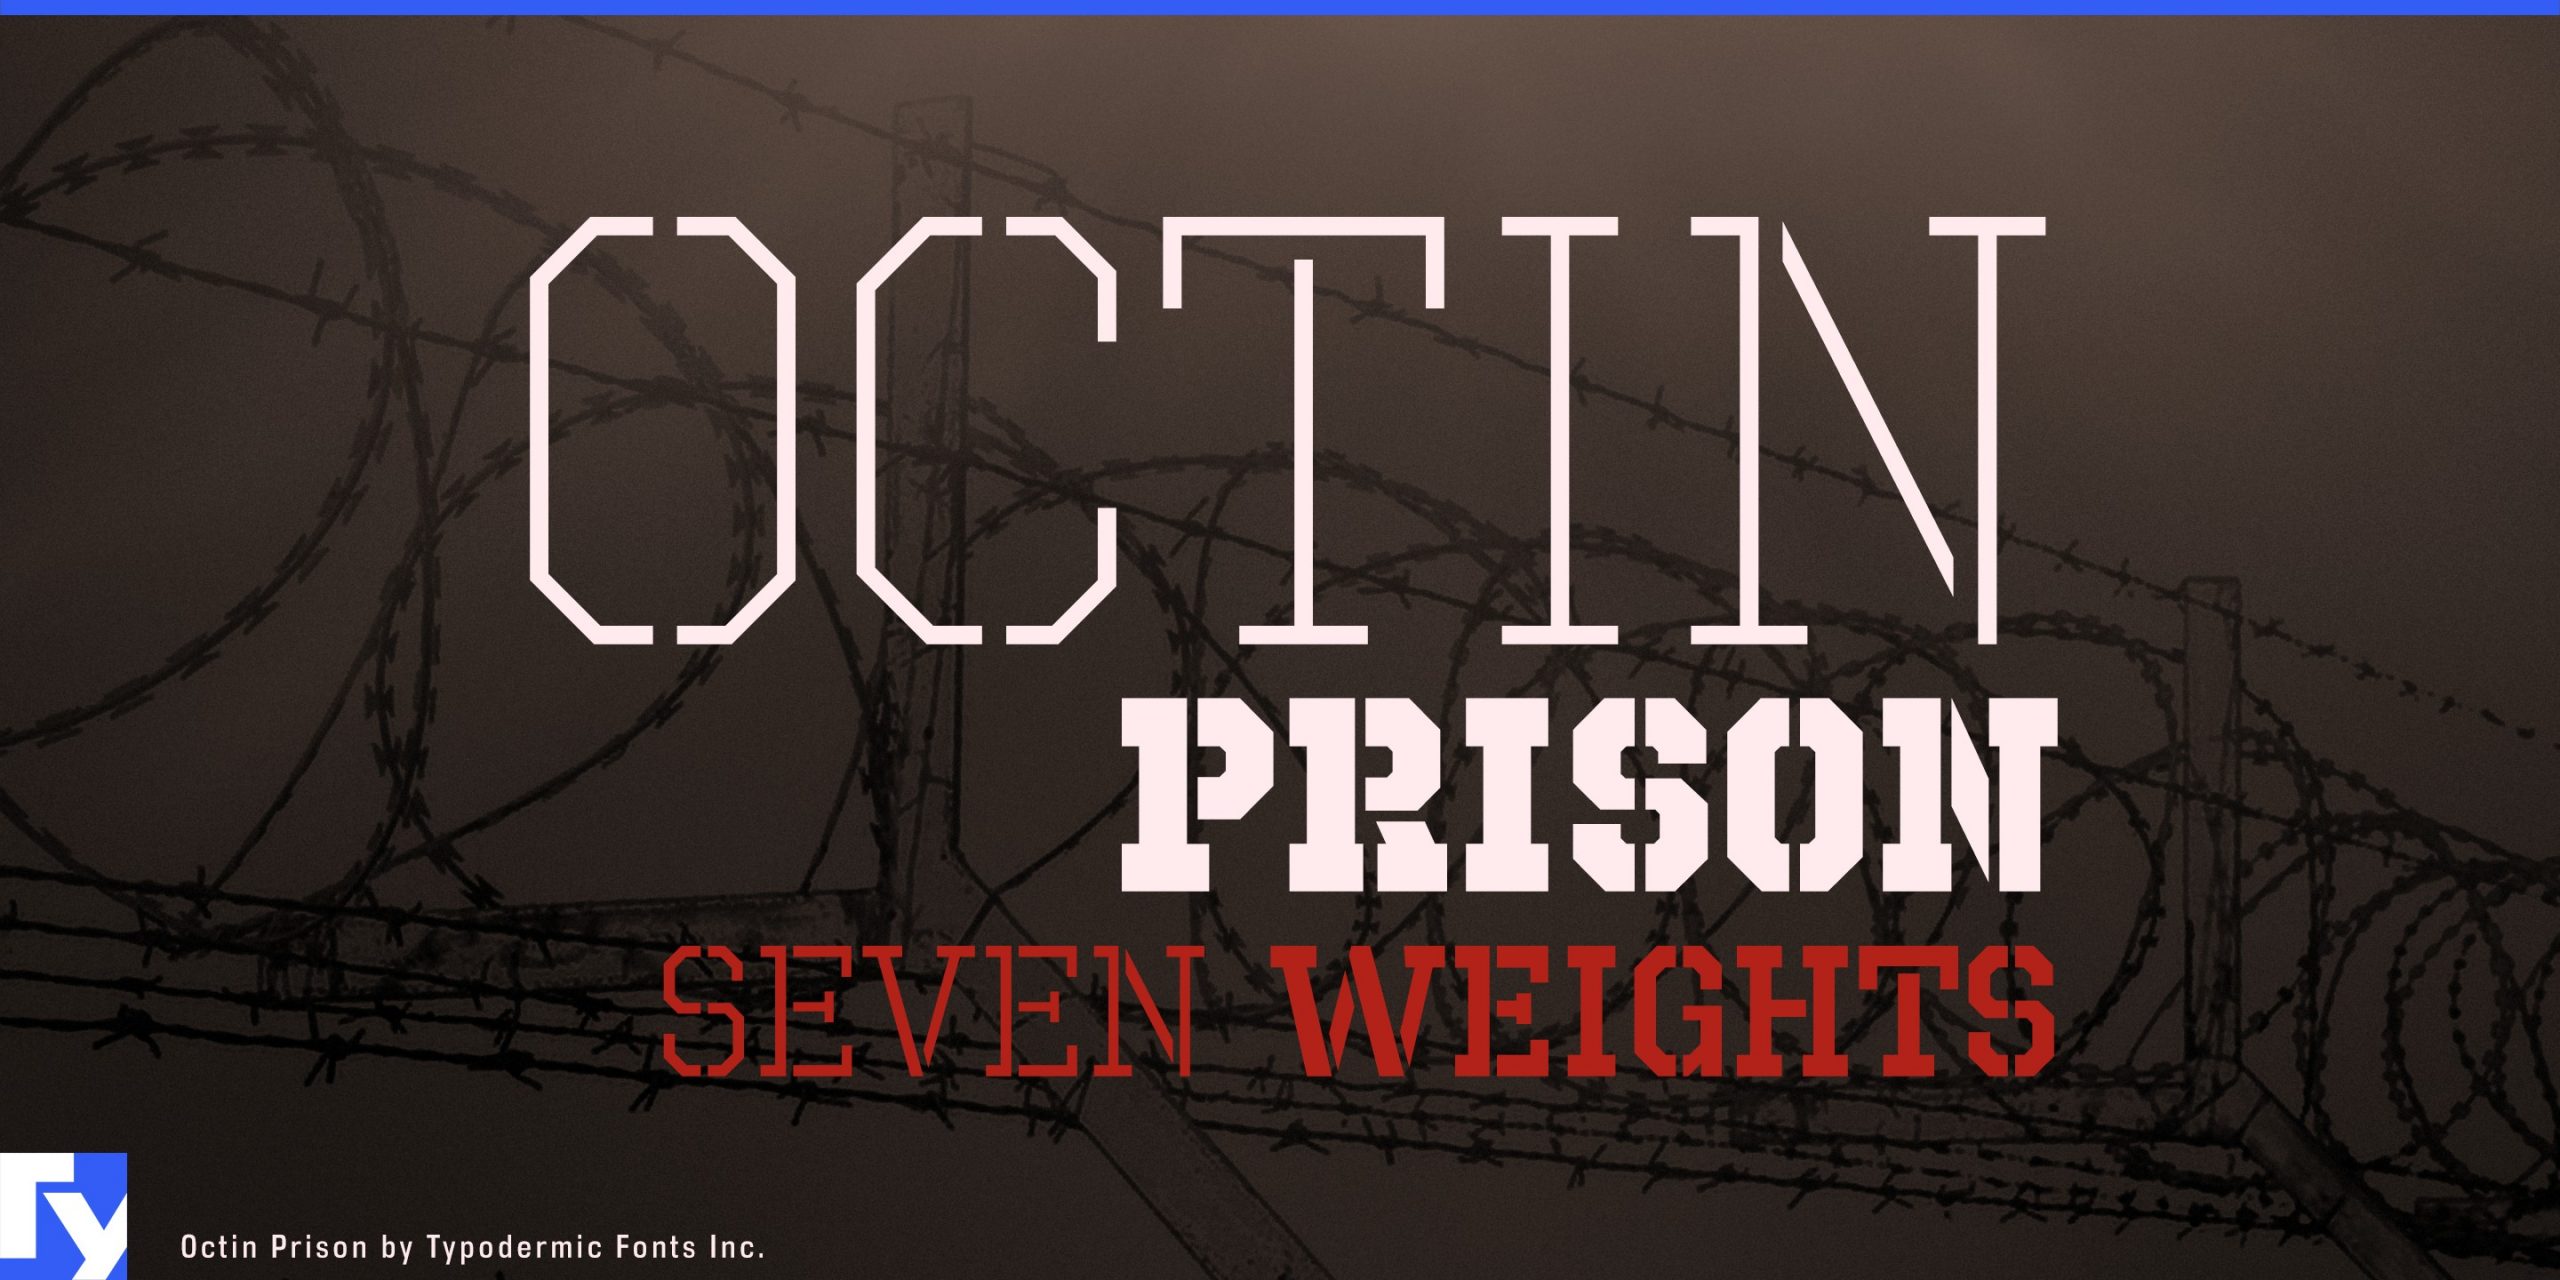 No-Nonsense Aesthetic: Octin Prison Typeface for Police Departments